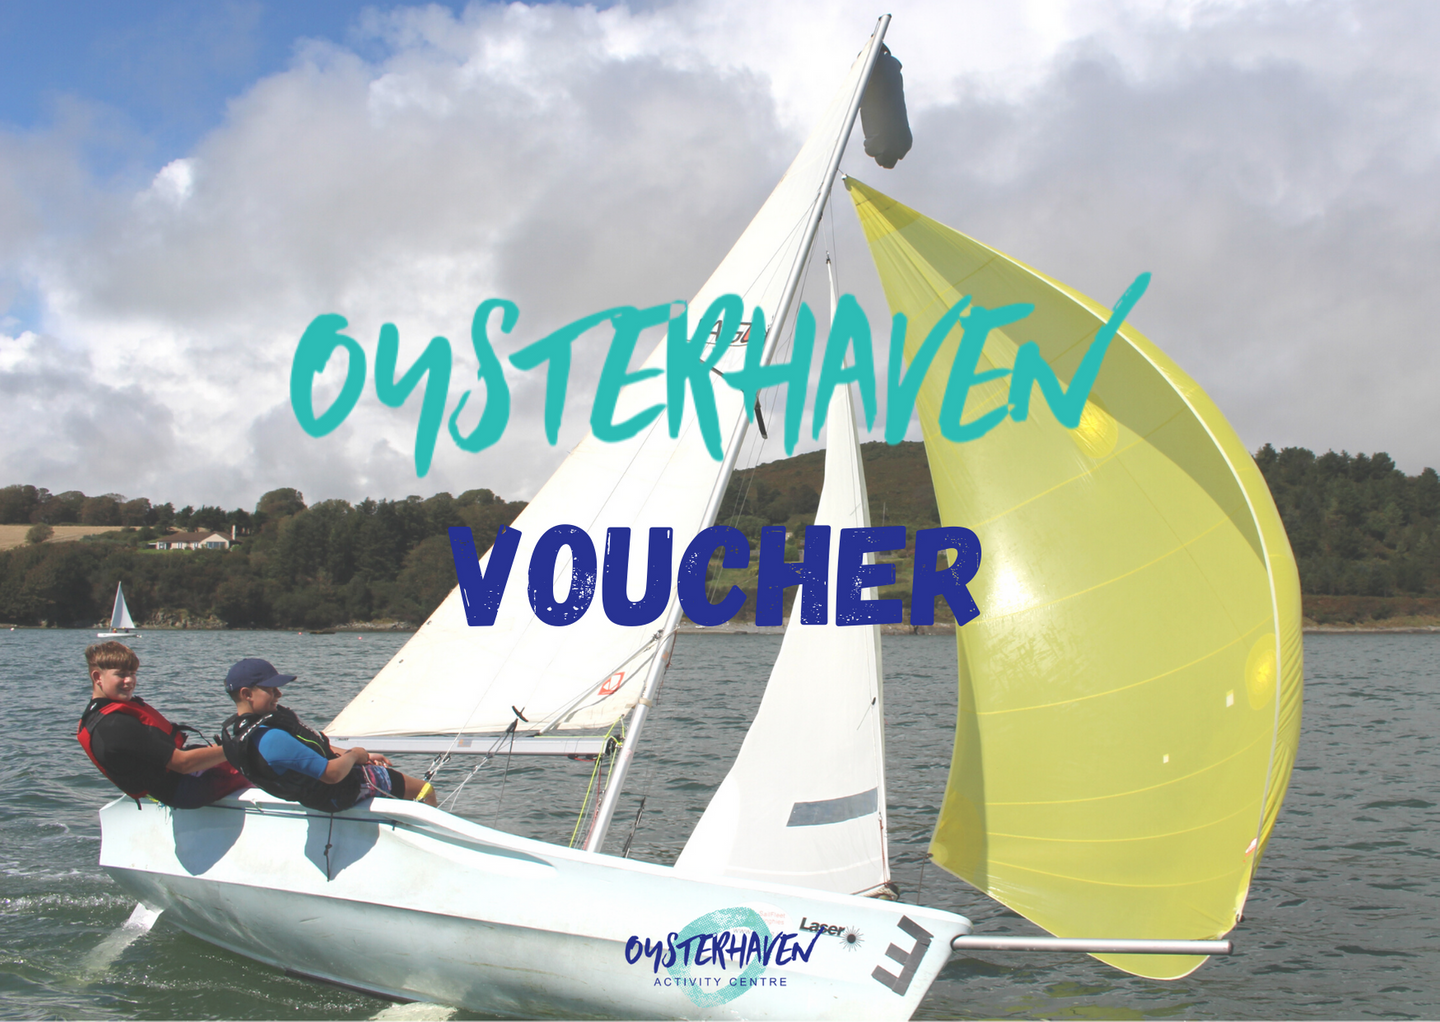 1.1 Private Sailing Tuition Voucher